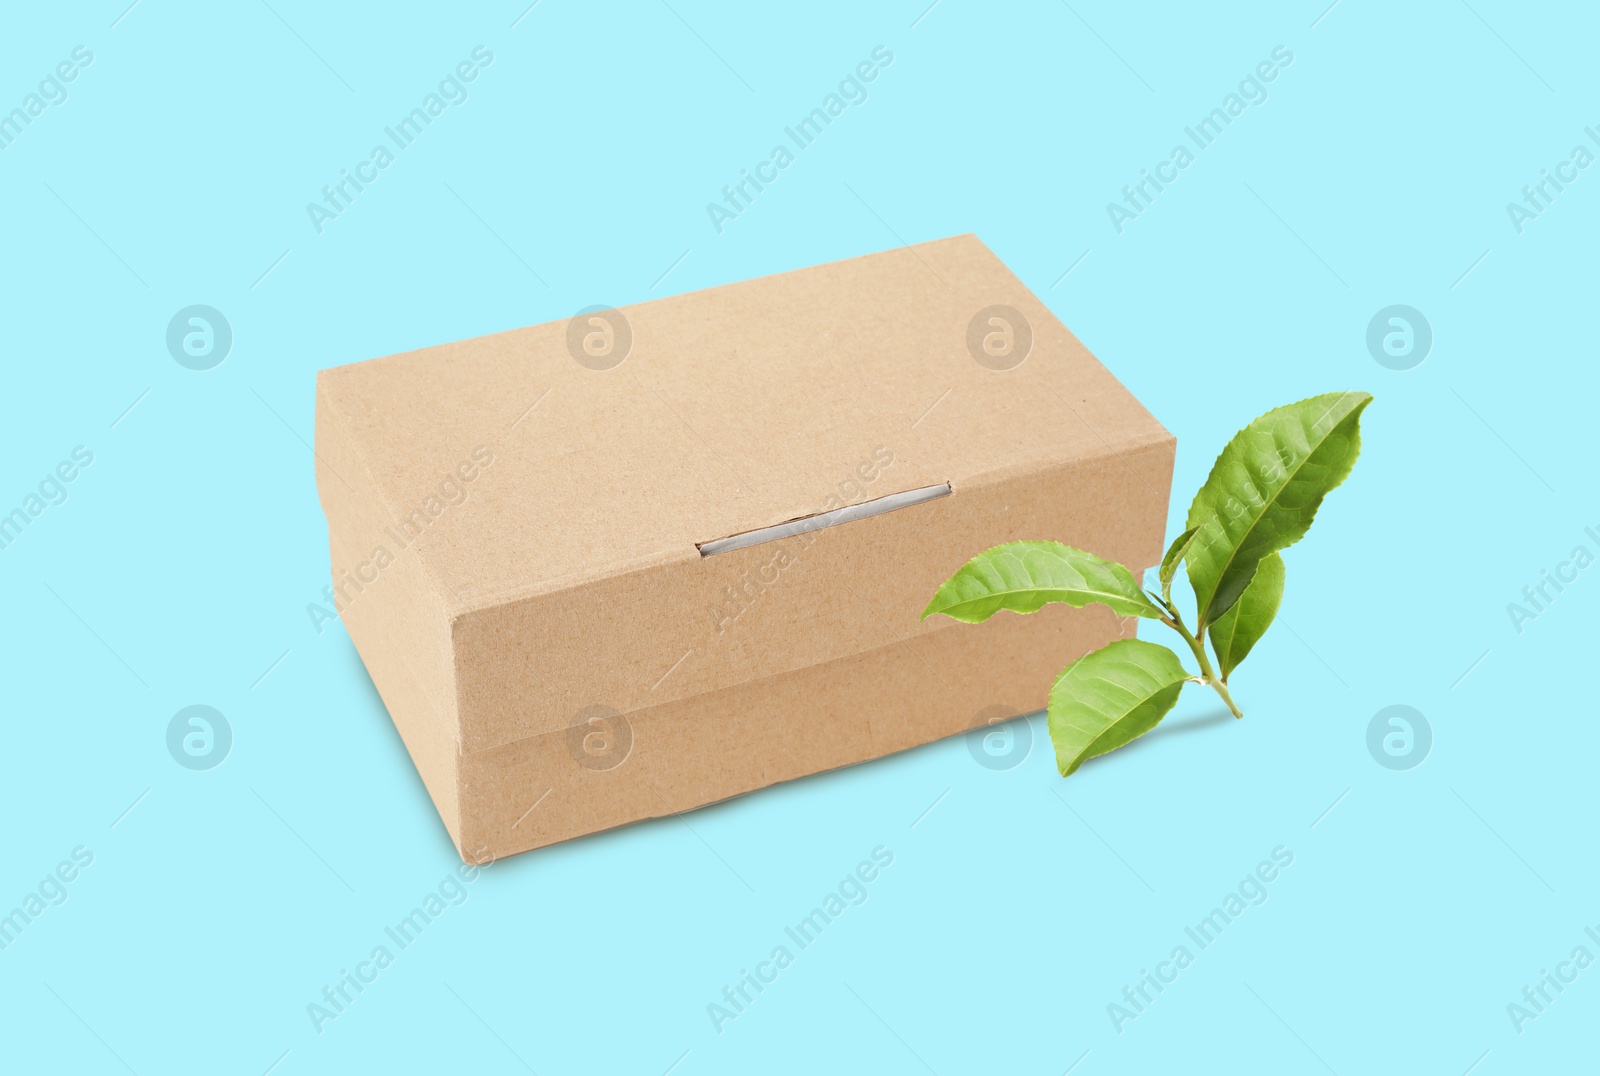 Image of Cardboard box and green leaves on cyan background. Eco friendly lifestyle